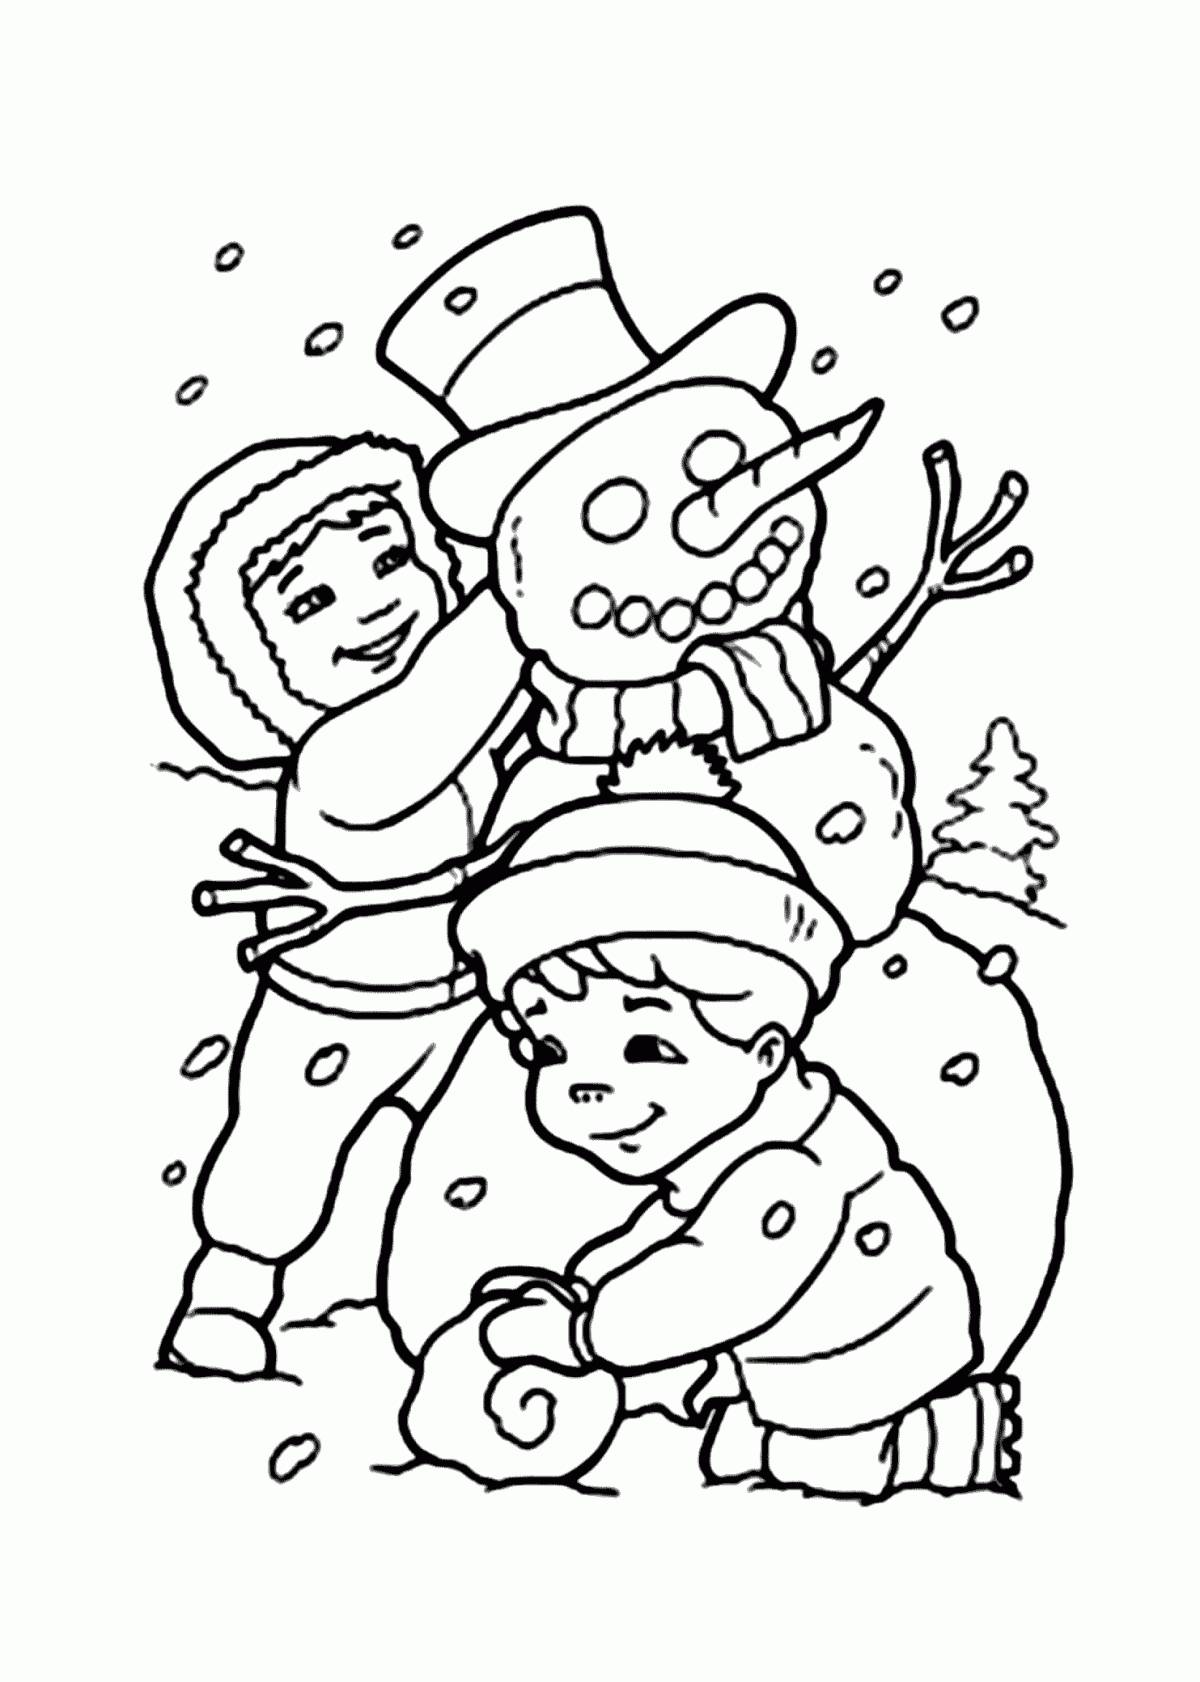 Bright coloring winter for children 10 years old